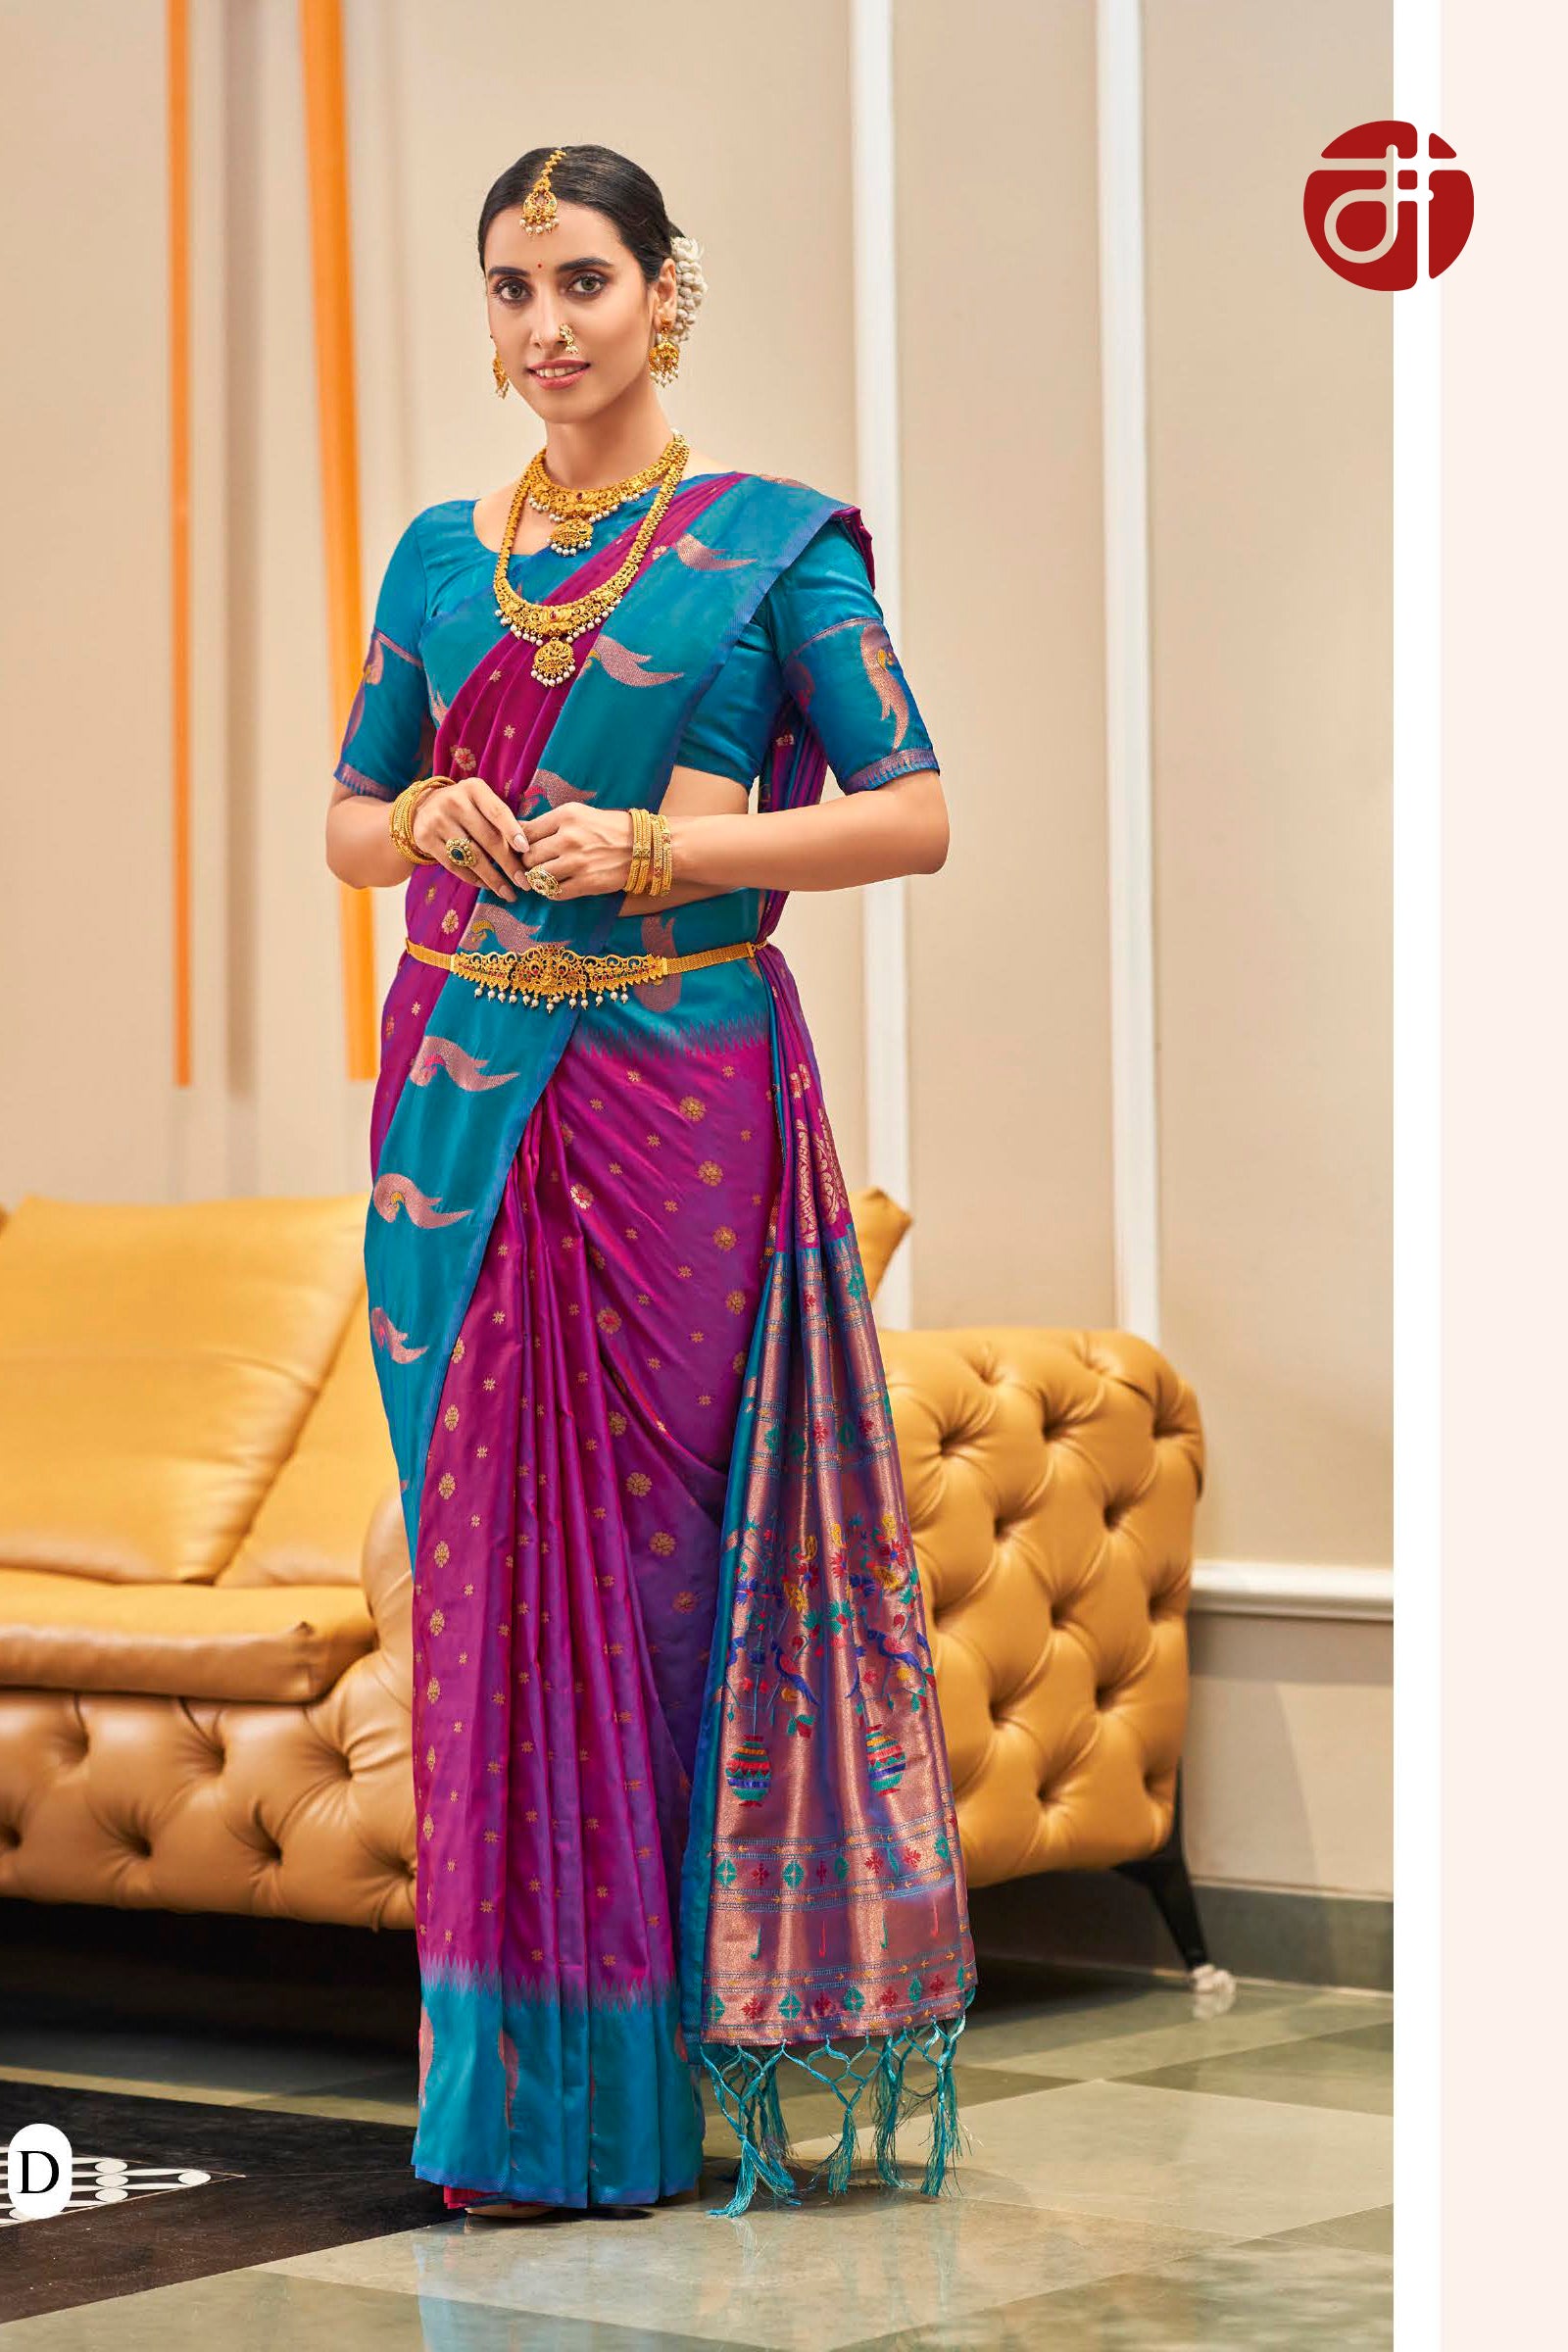 BridalShopping: How Much Does A Paithani Saree Cost?